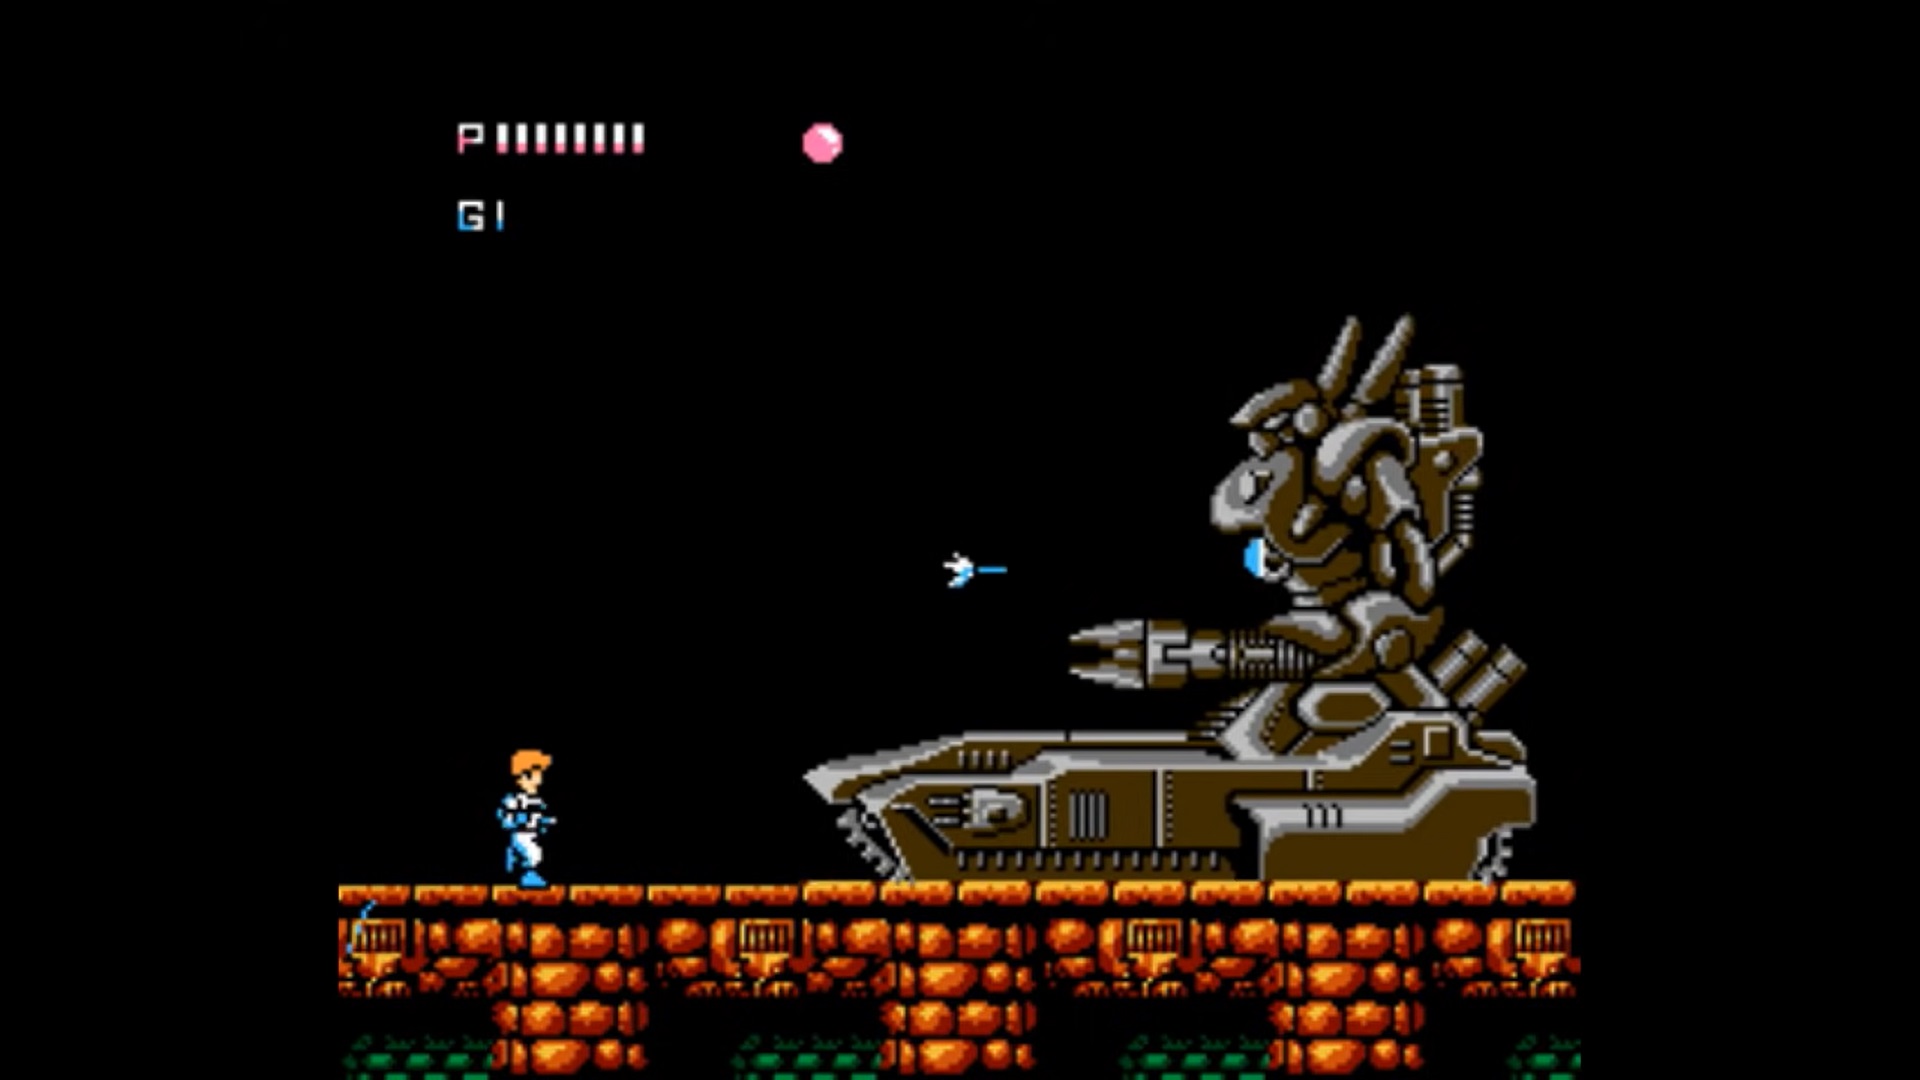 Journey to Silius - a massive humanoid tank fires at a blue-clad hero.